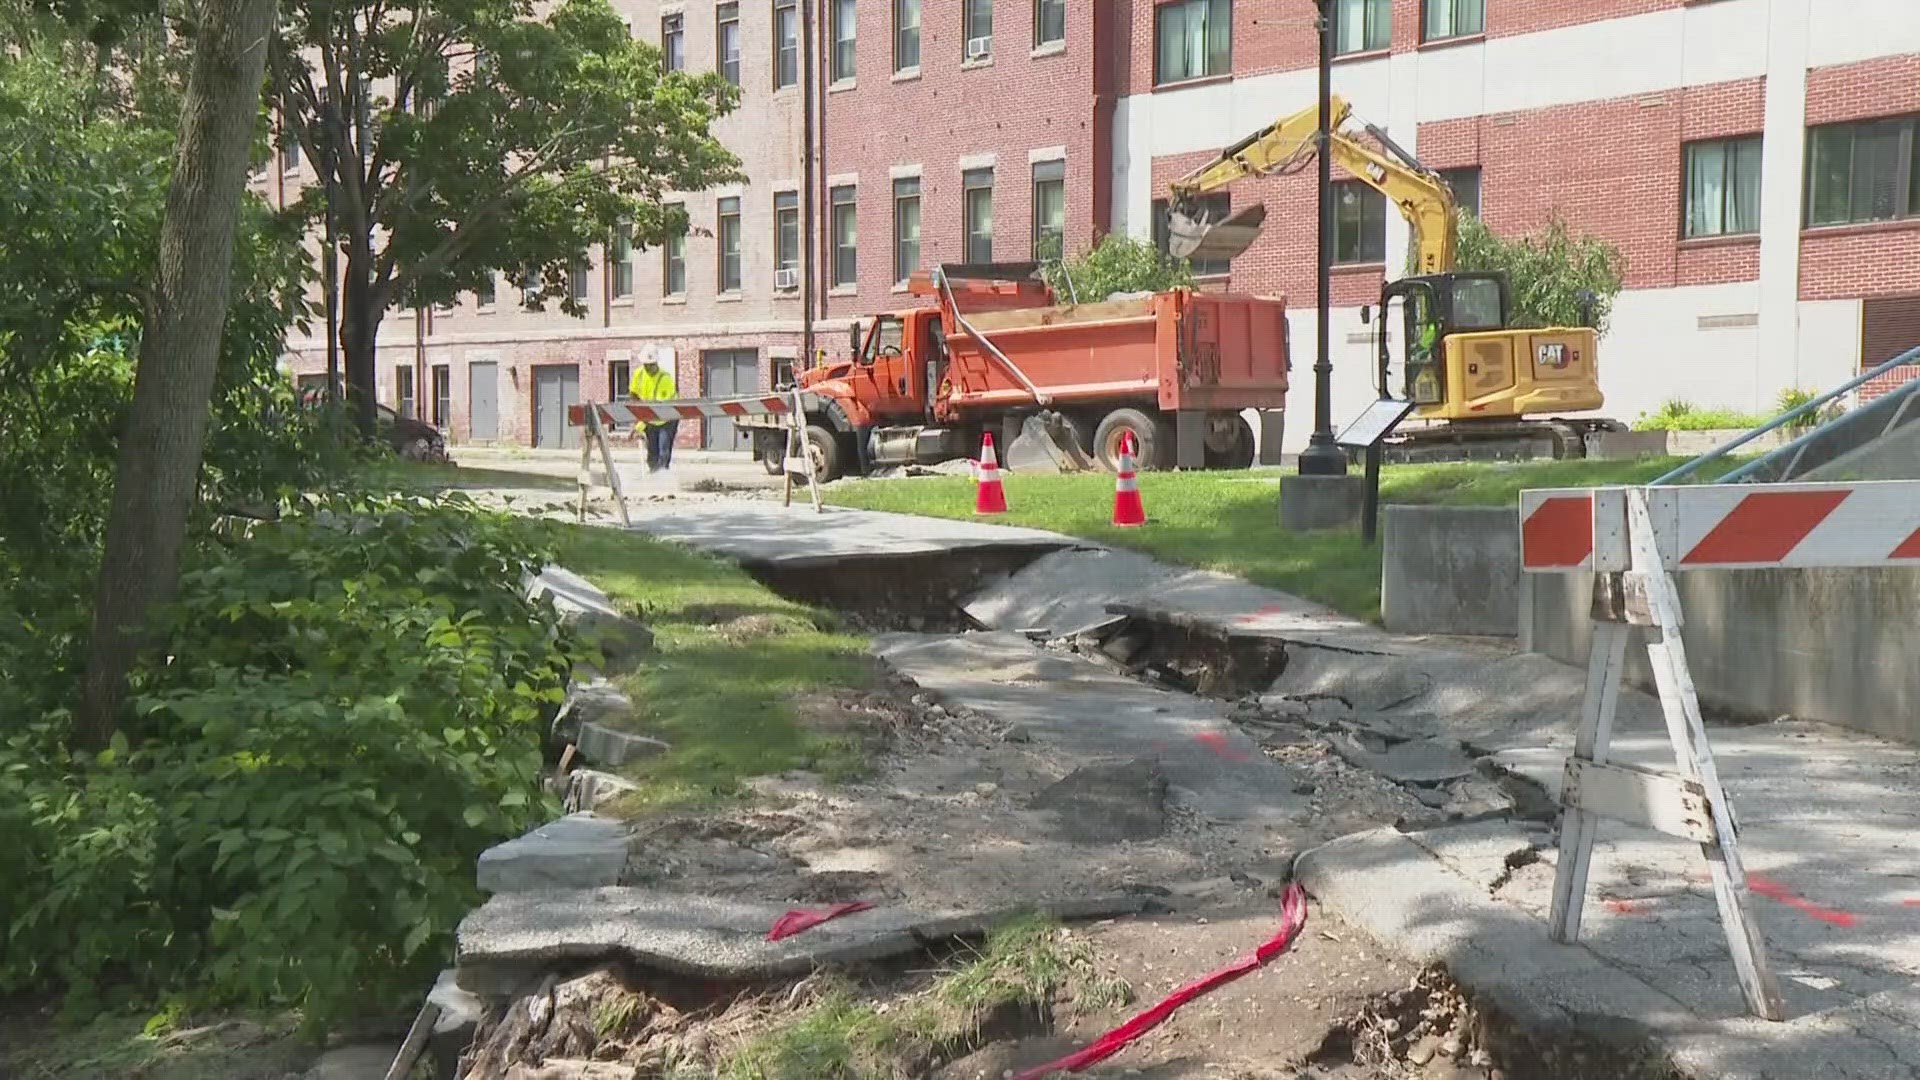 Dozens of people were forced out of their apartment building after water caved through the roof in Lewiston, while the City of Auburn forecasts millions in repairs.